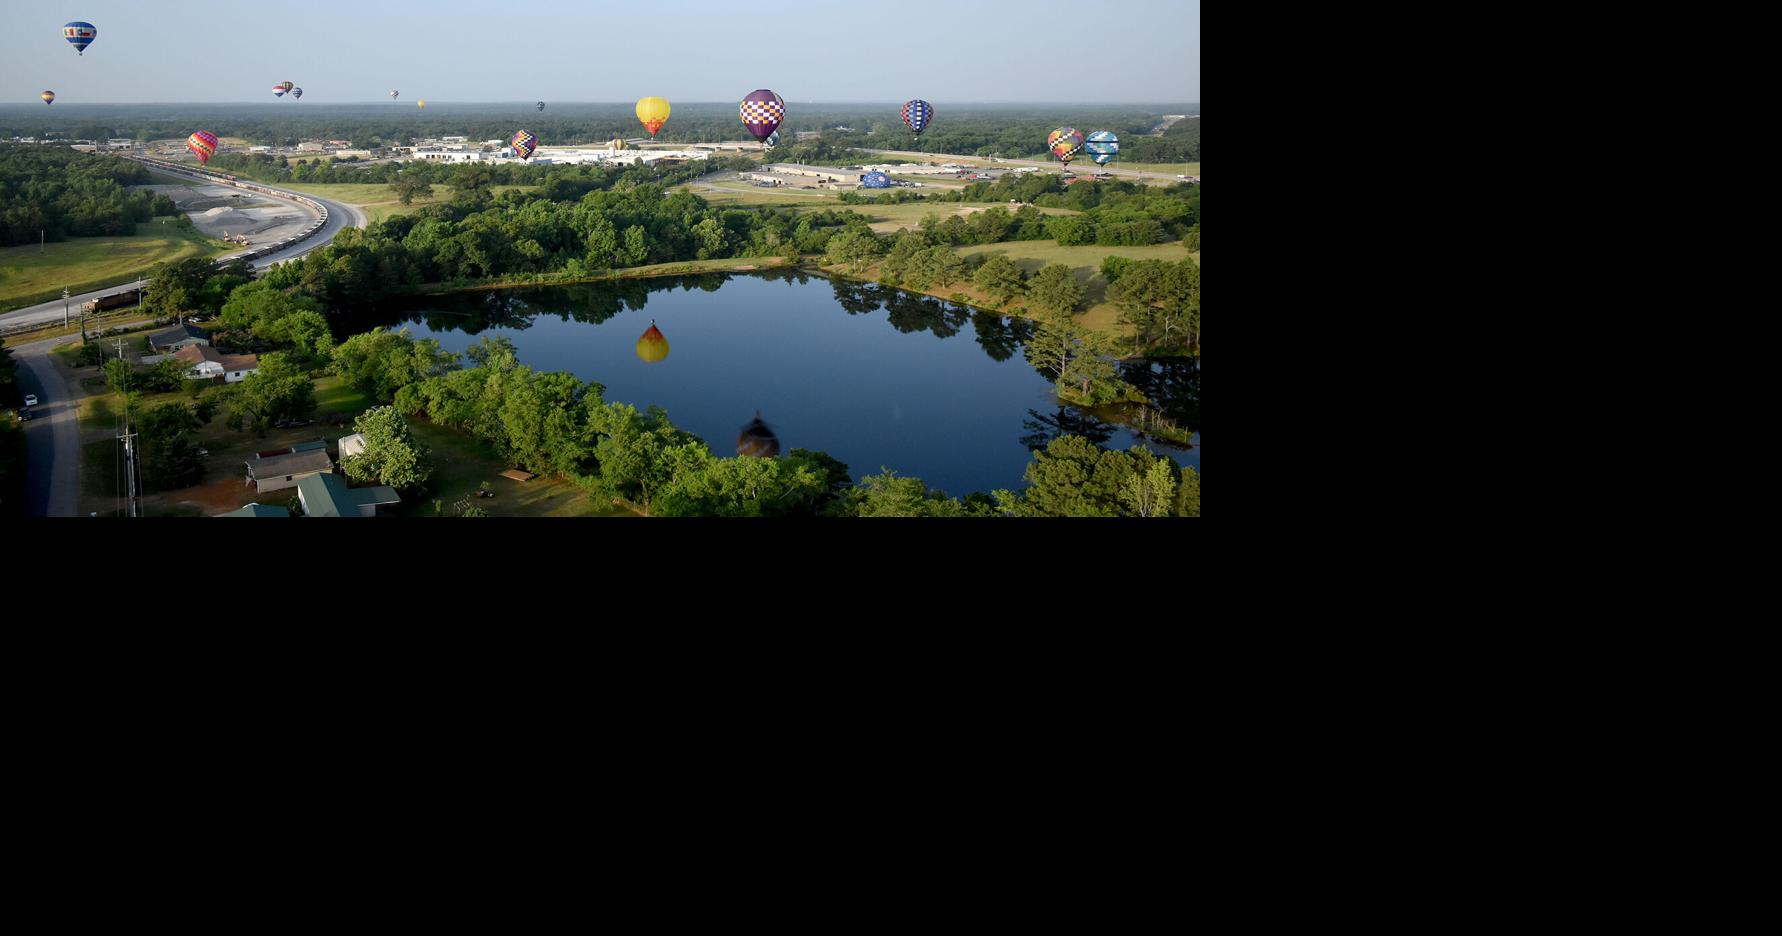 ‘Let’s go’ The Great Texas Balloon Race opens in the sky over Longview